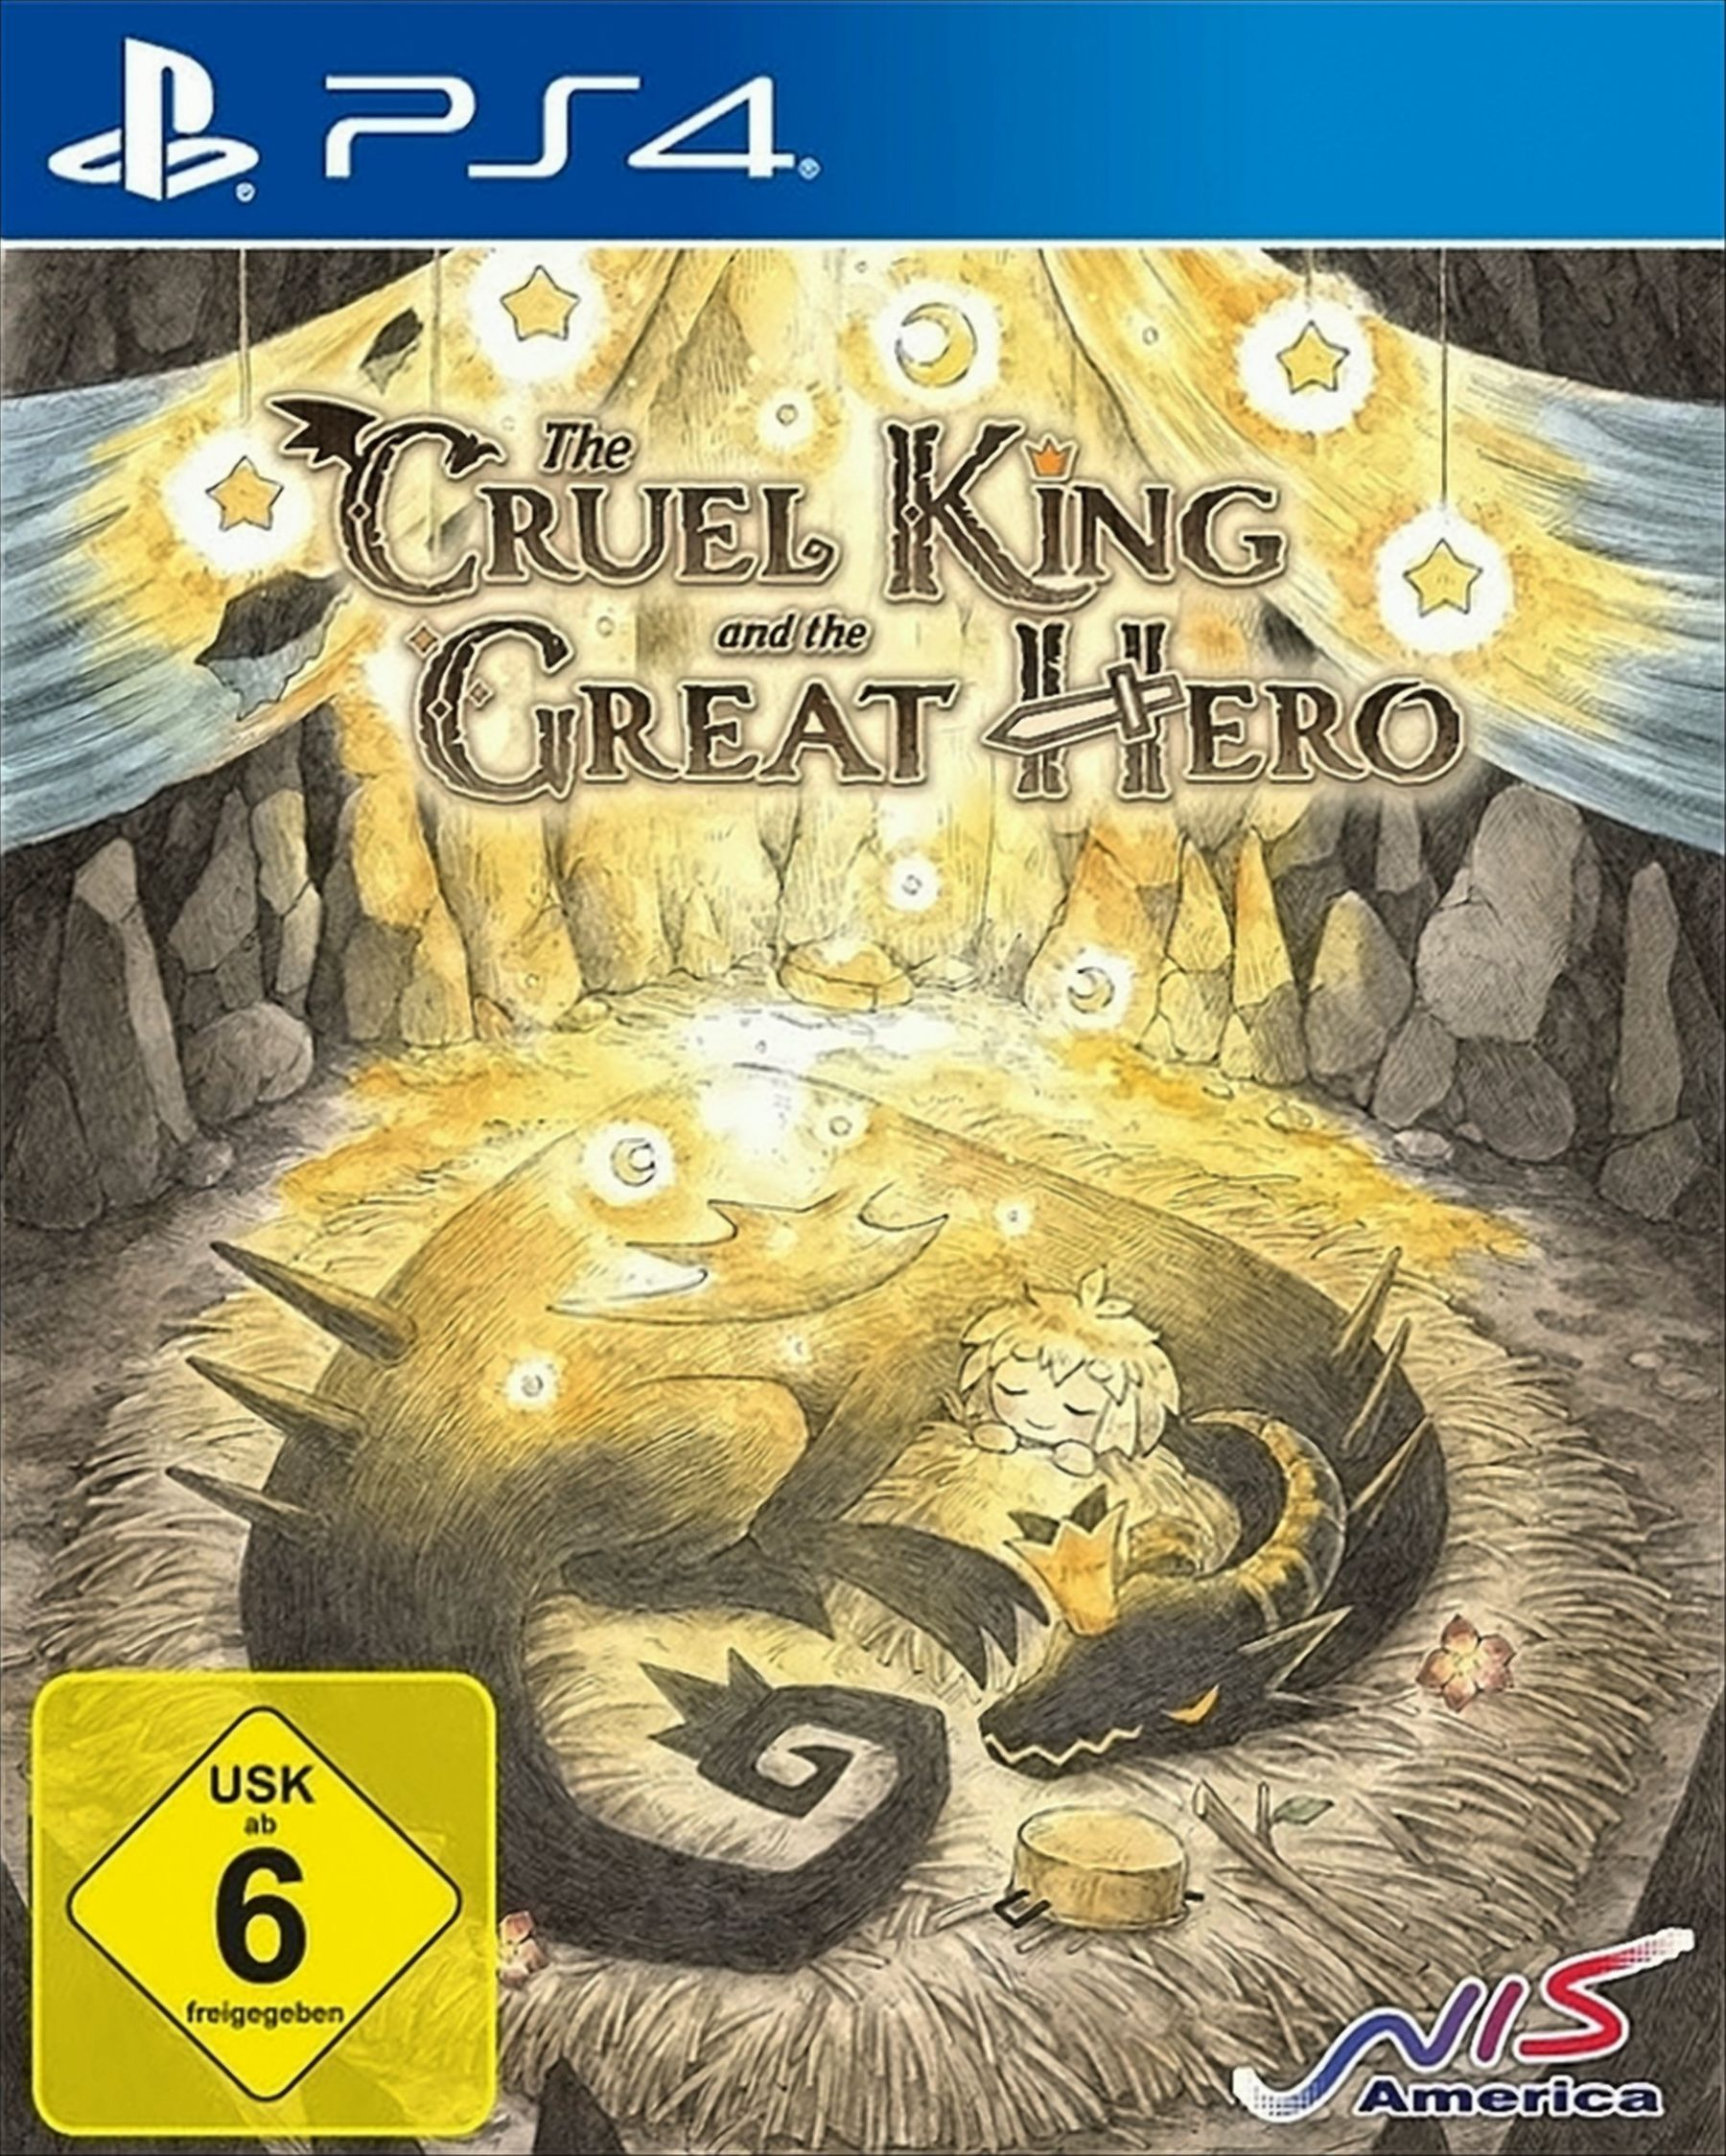 Hero The and 4] Edition King Storybook - [PlayStation - the Cruel Great